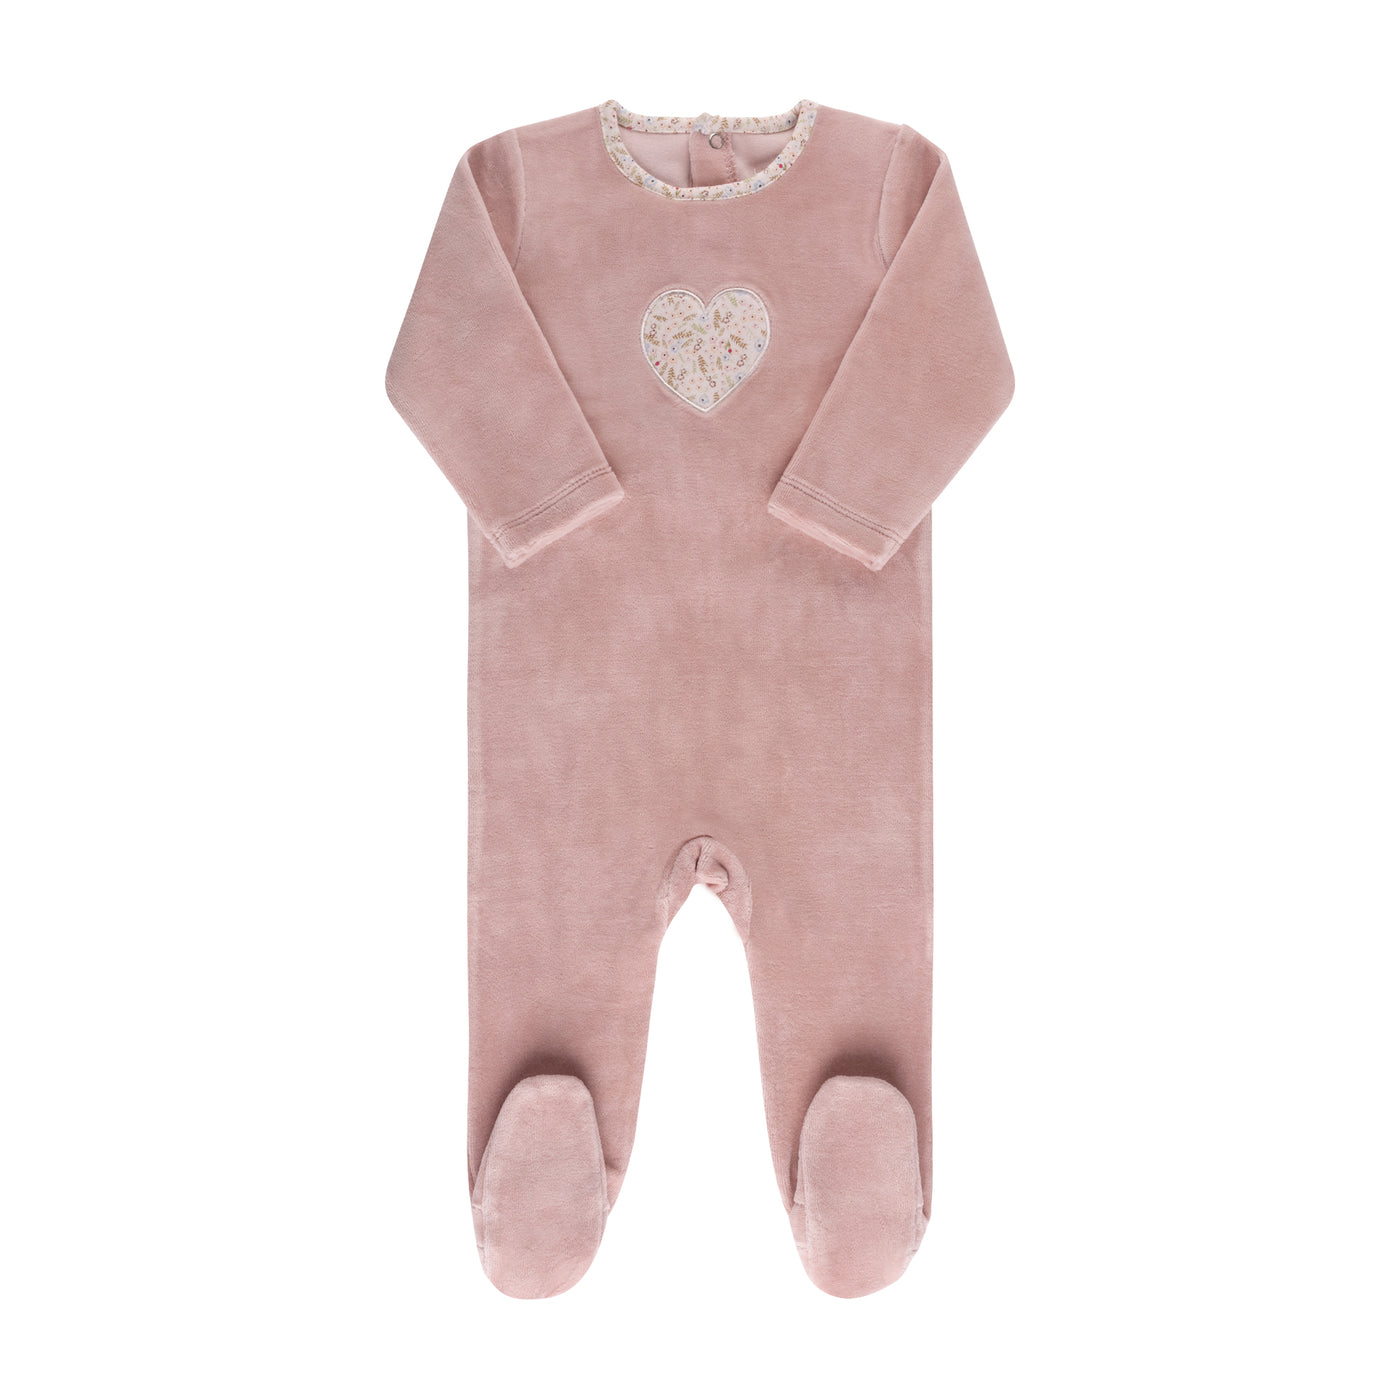 Ely's & Co. Floral Heart Pink Velour Footie